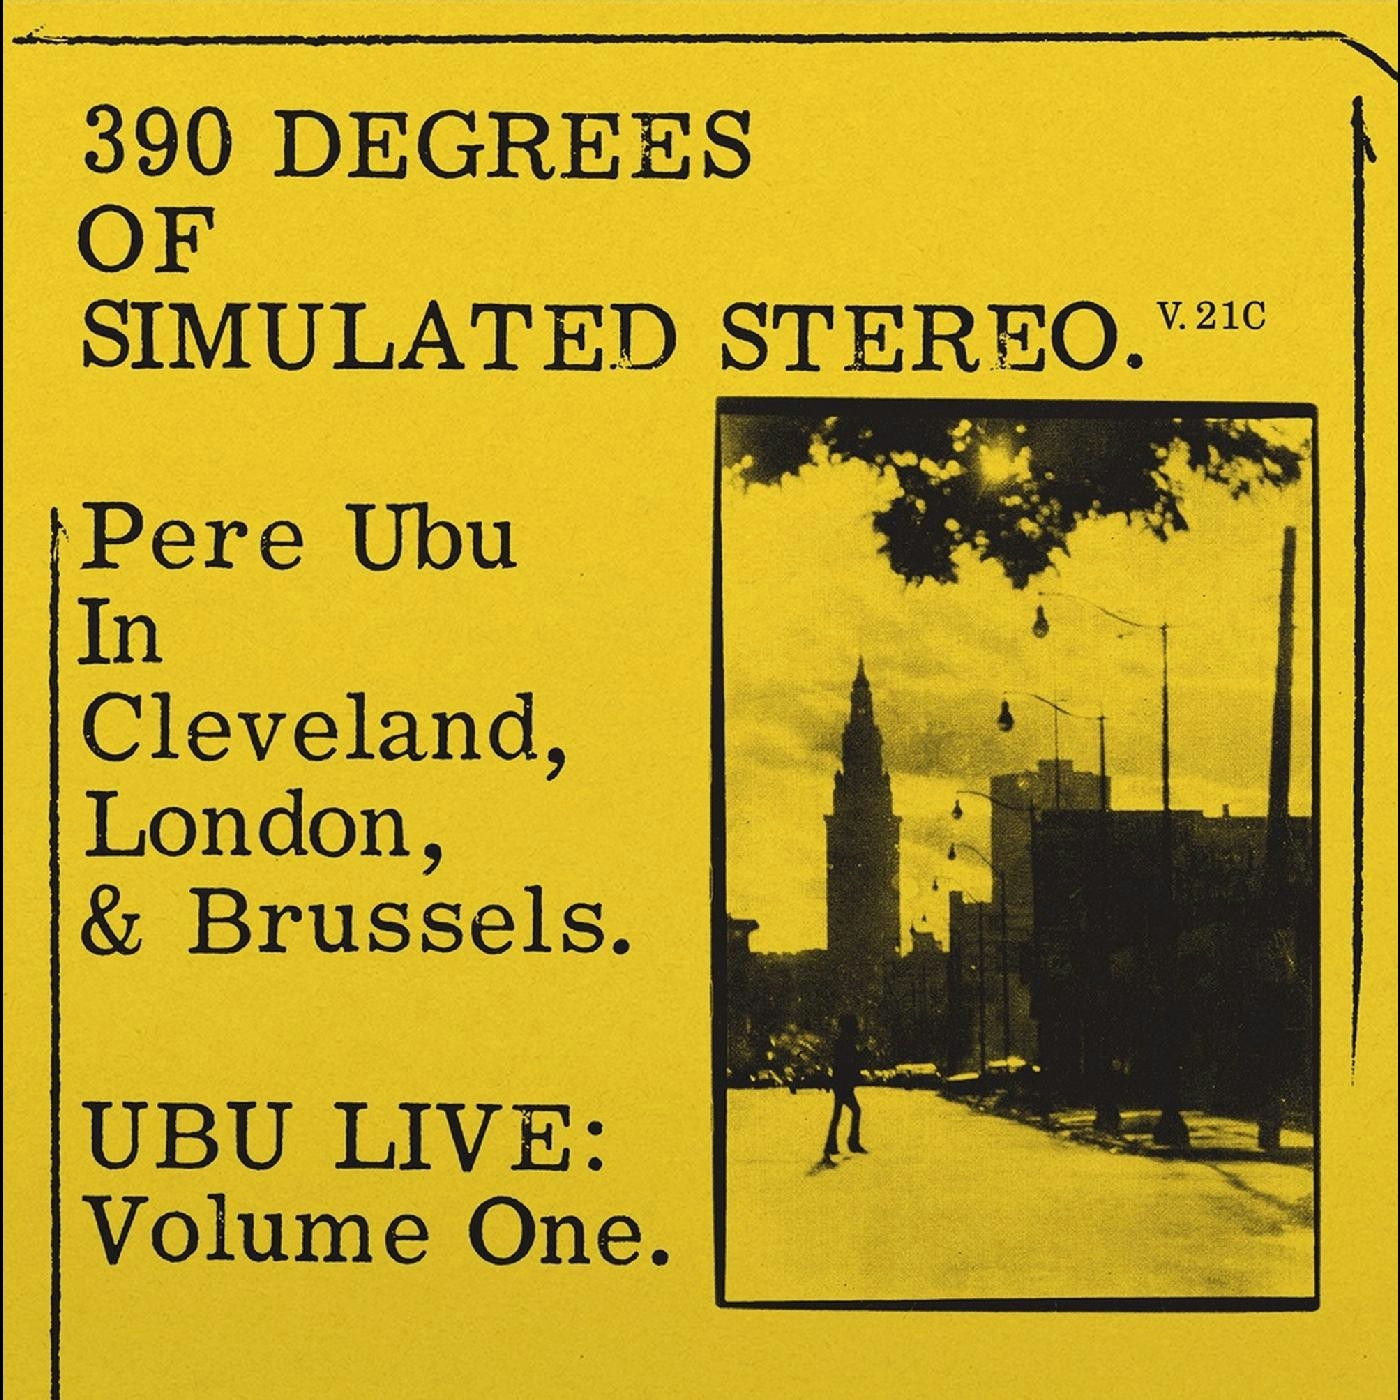 Album artwork for 390 Degrees of Simulated Stereo V2.1 by Pere Ubu